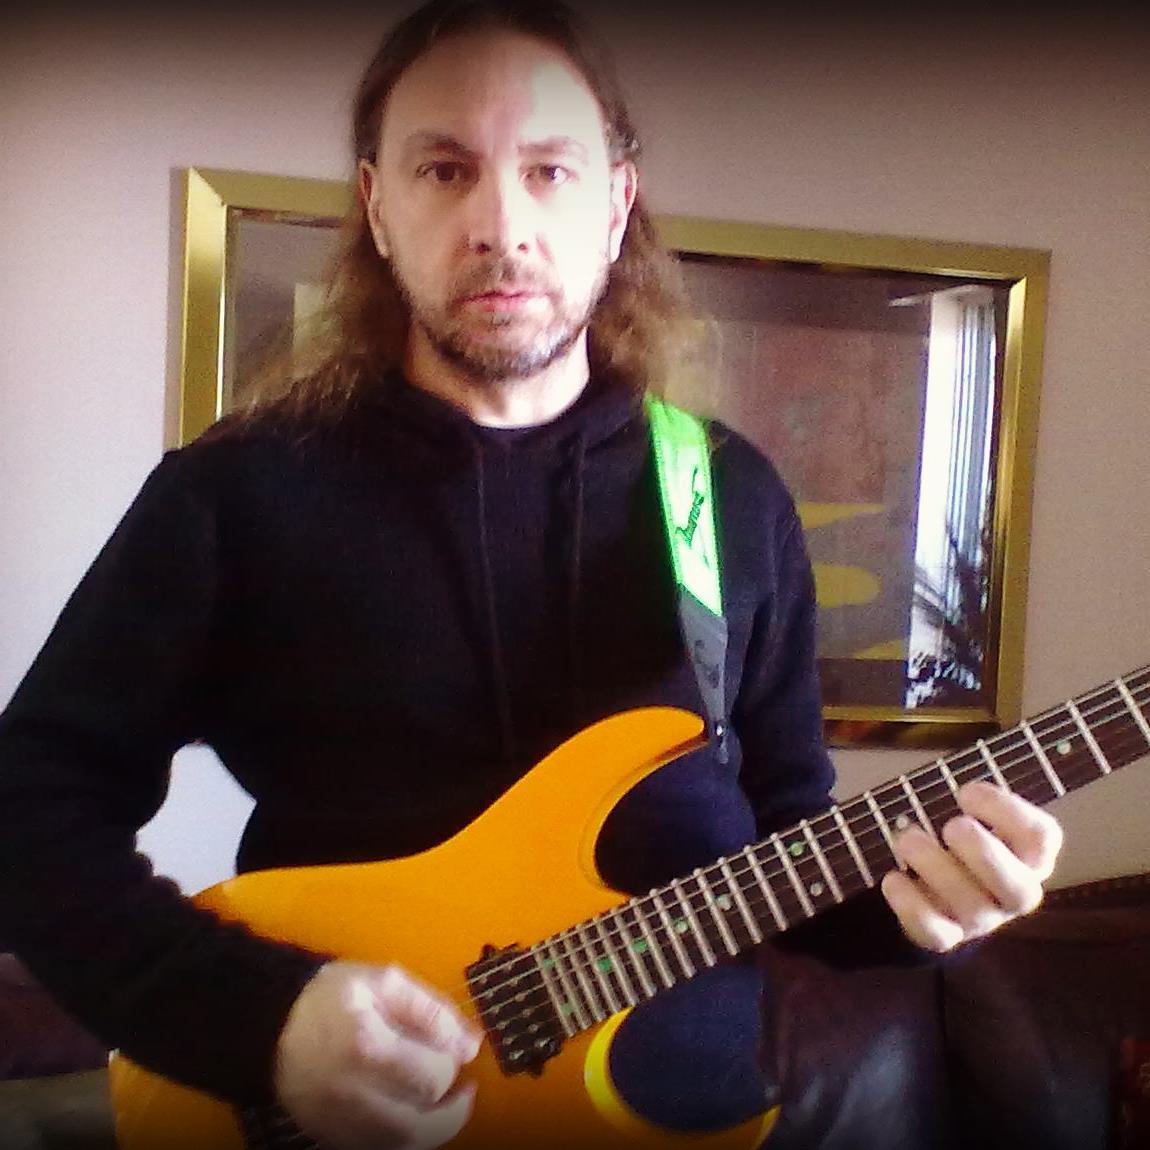 Musician, Guitarist, Vocalist, Composer. Neo-classical, power metal, fusion. YouTube channel https://t.co/CQix0LCYSa